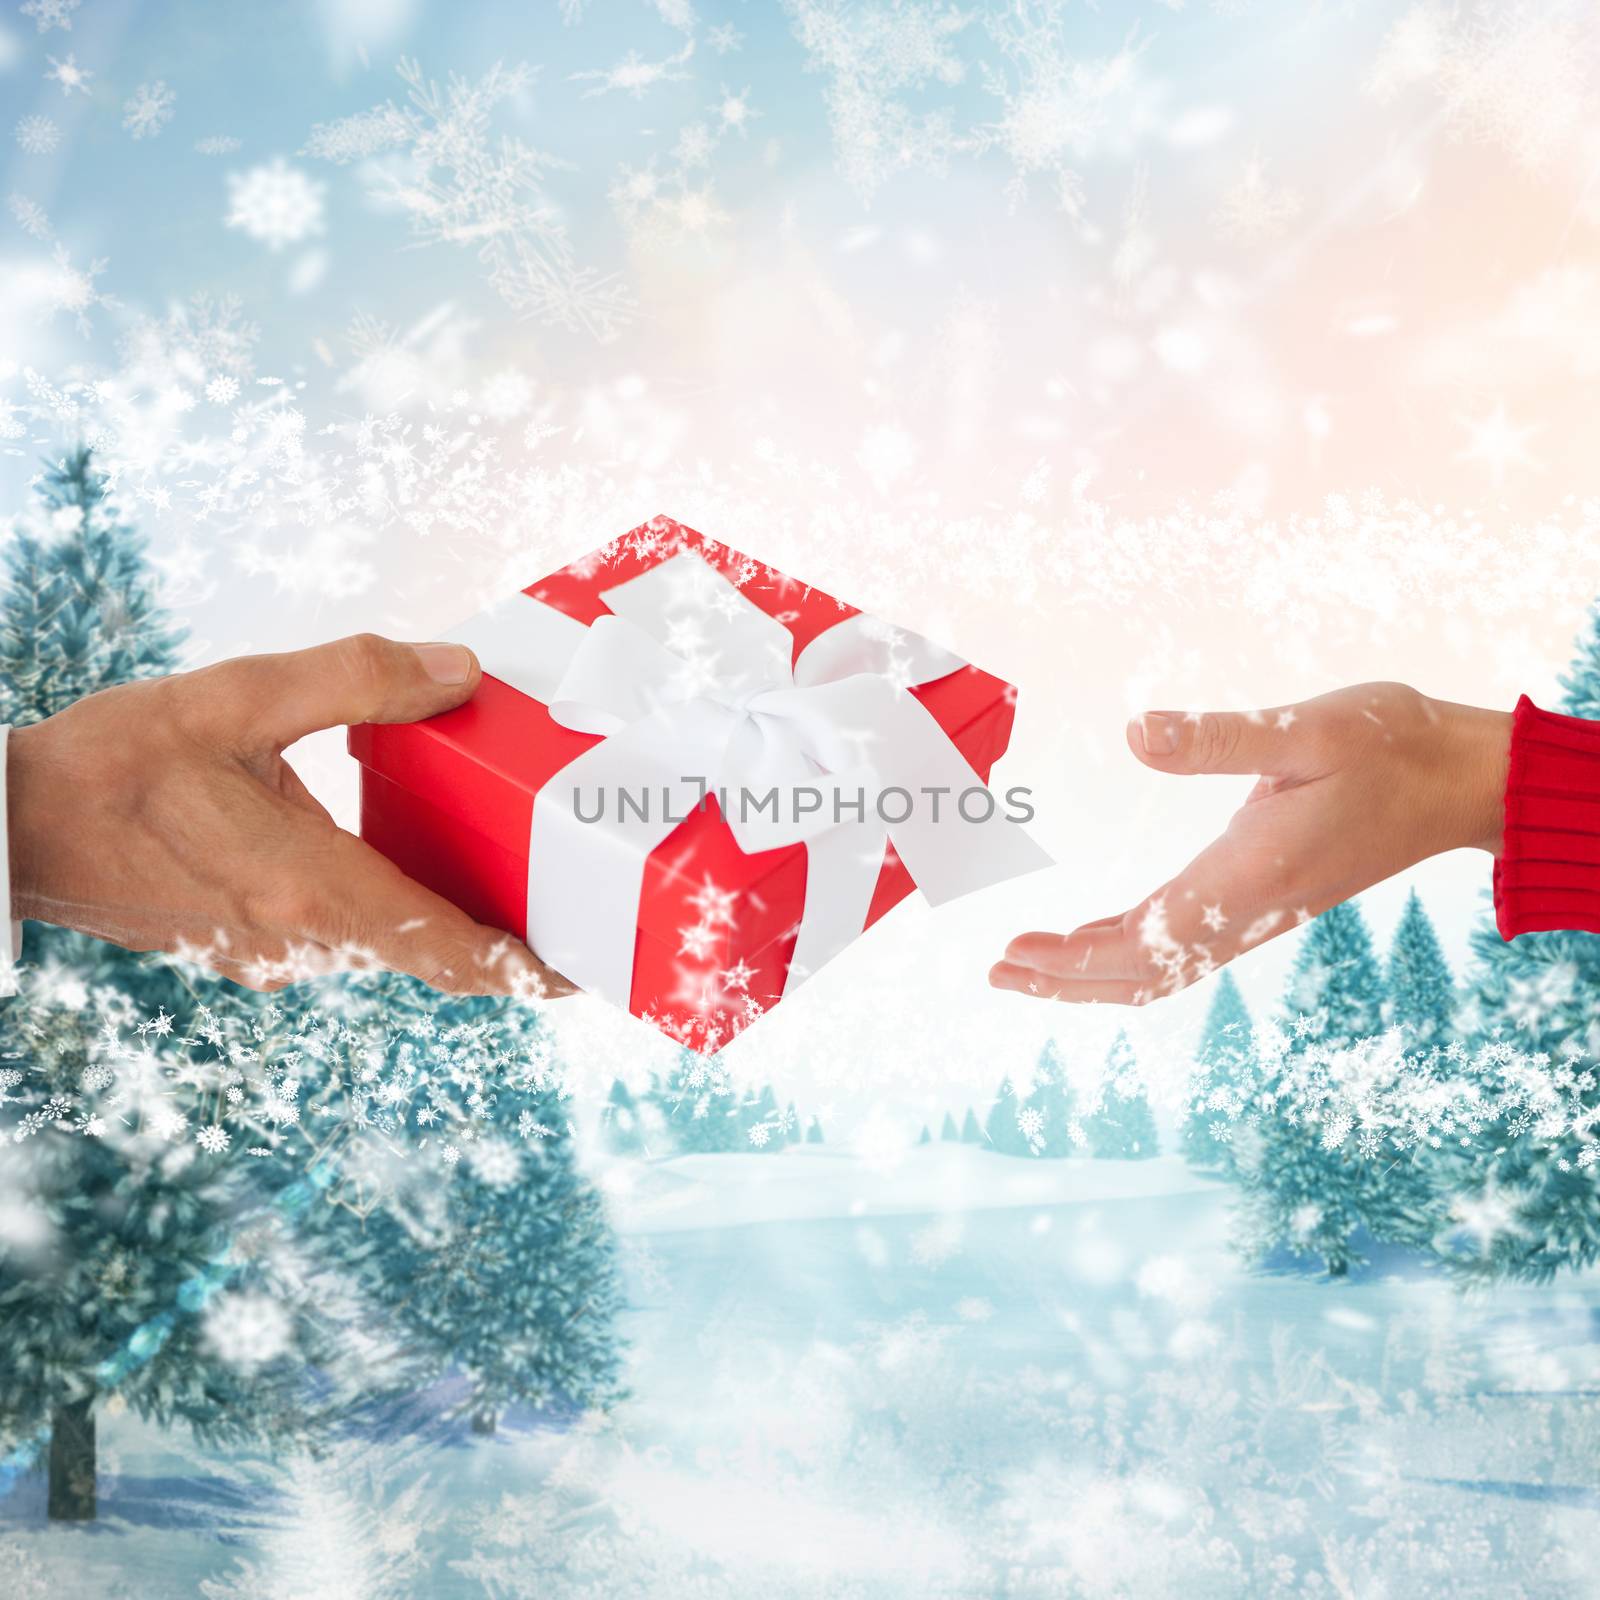 Couple holding gift against snowy landscape with fir trees